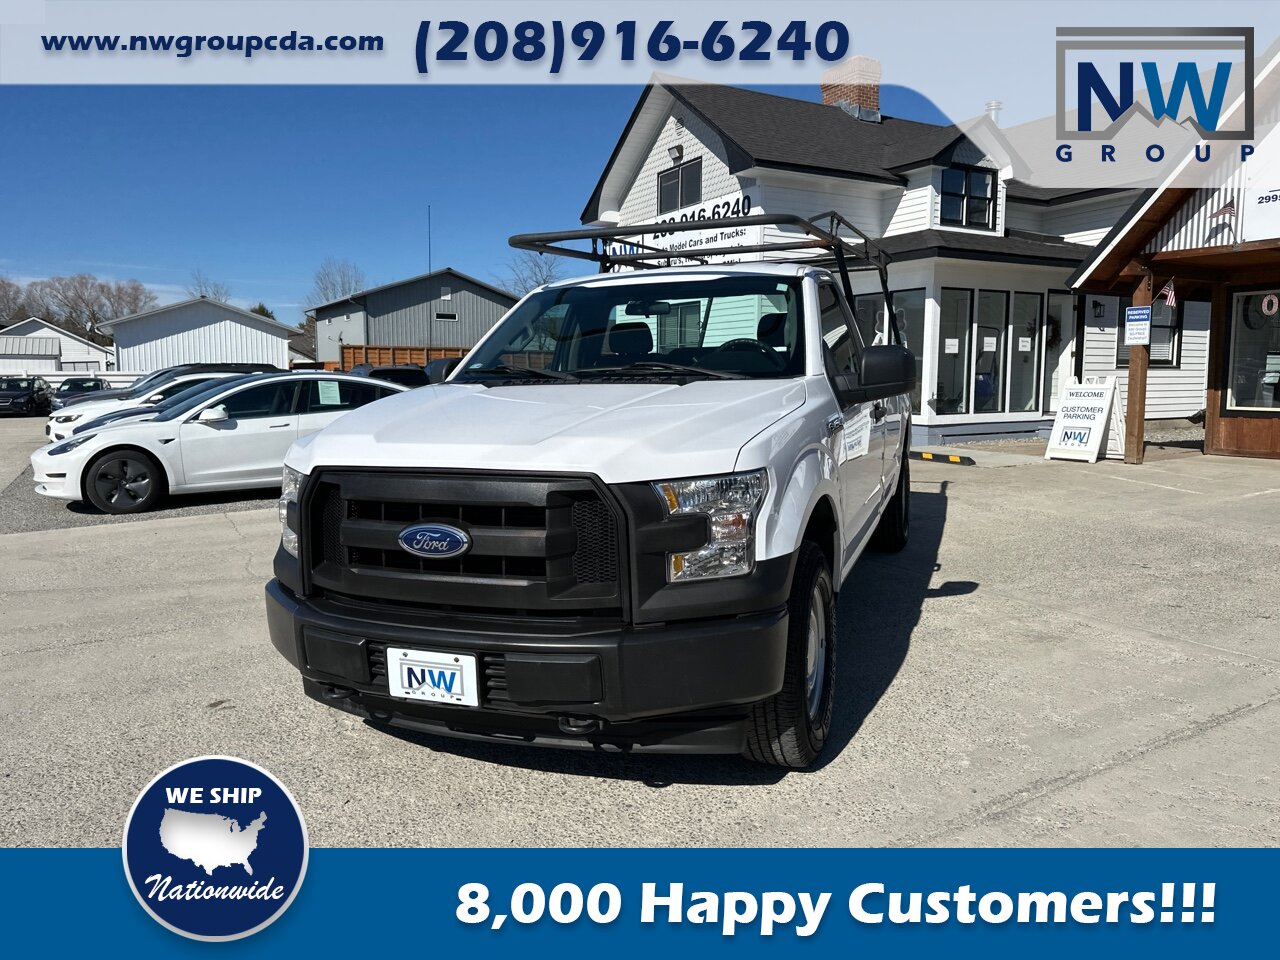 2017 Ford F-150 XL.  5.0L V8, 4x4, Very Rare! Long Bed with Accessory Rack! - Photo 3 - Post Falls, ID 83854